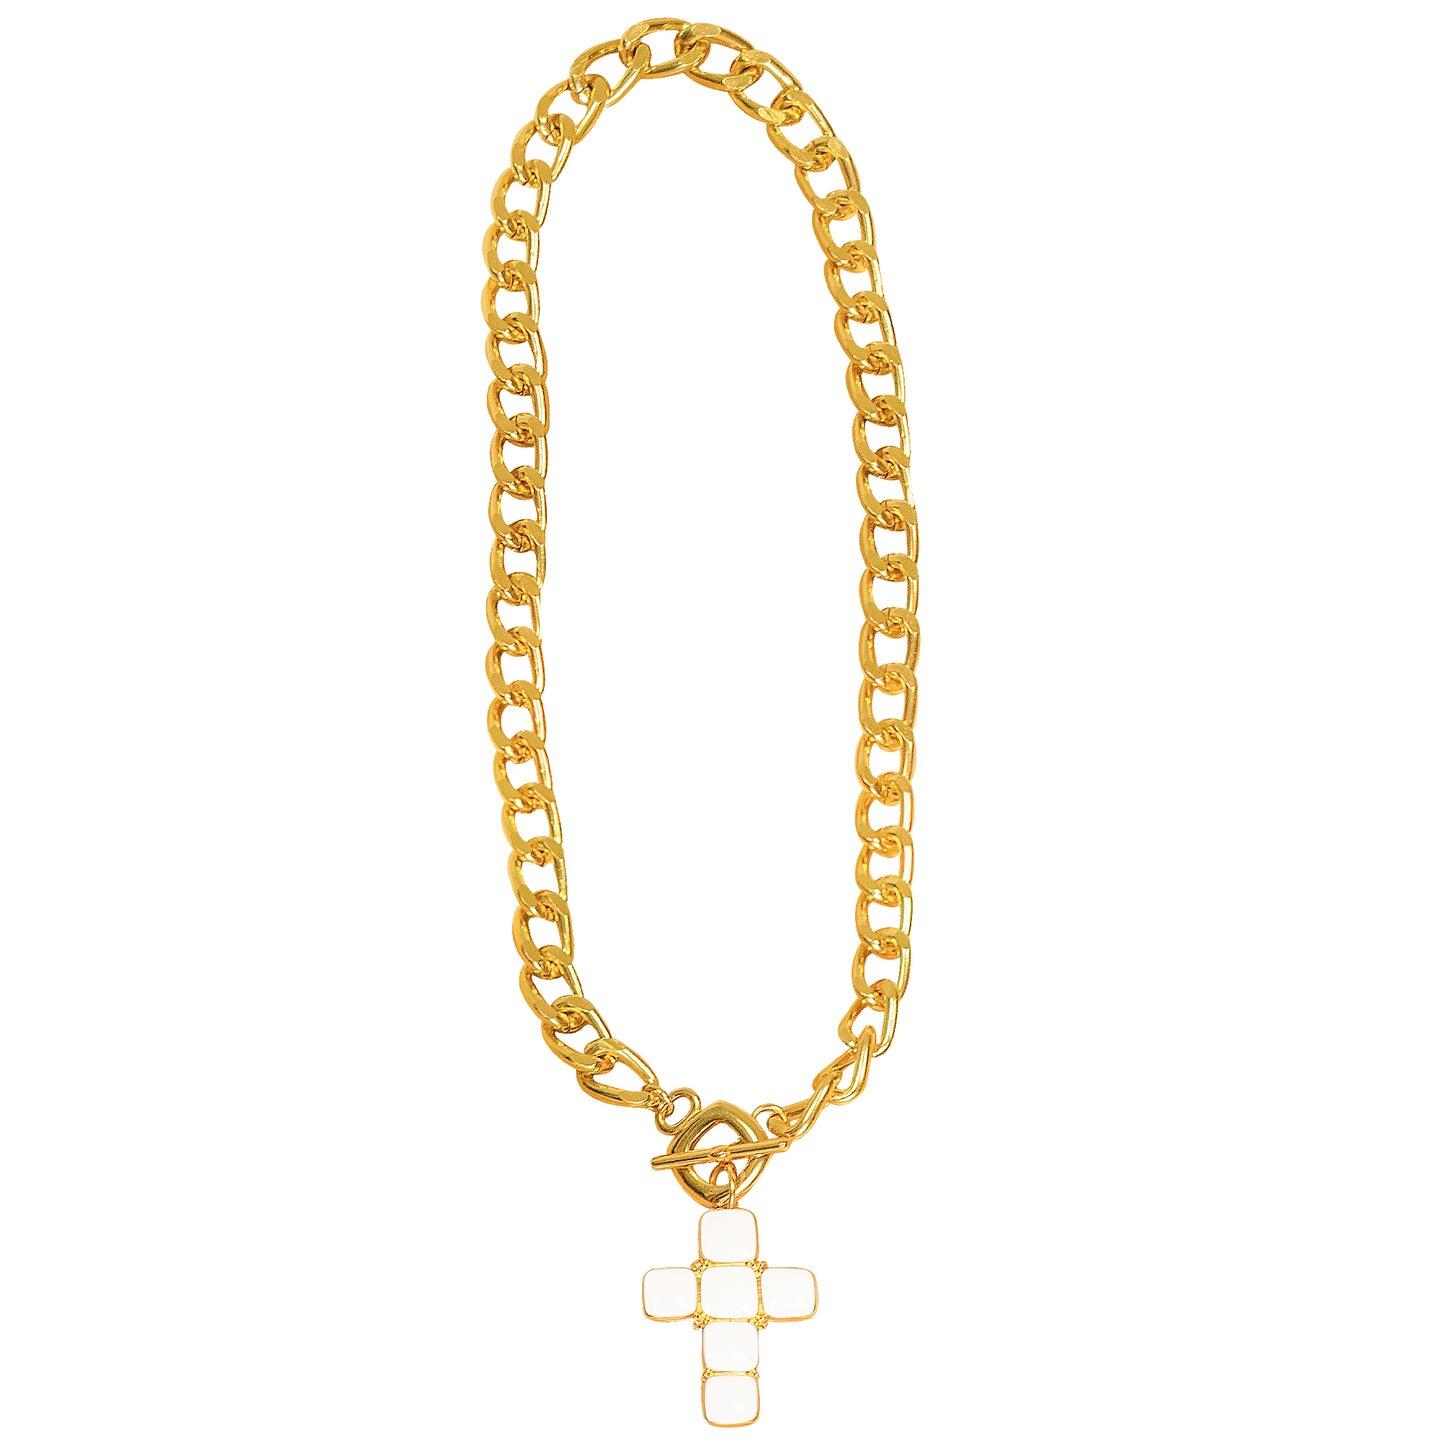 White Cross Necklace With Gold Chain